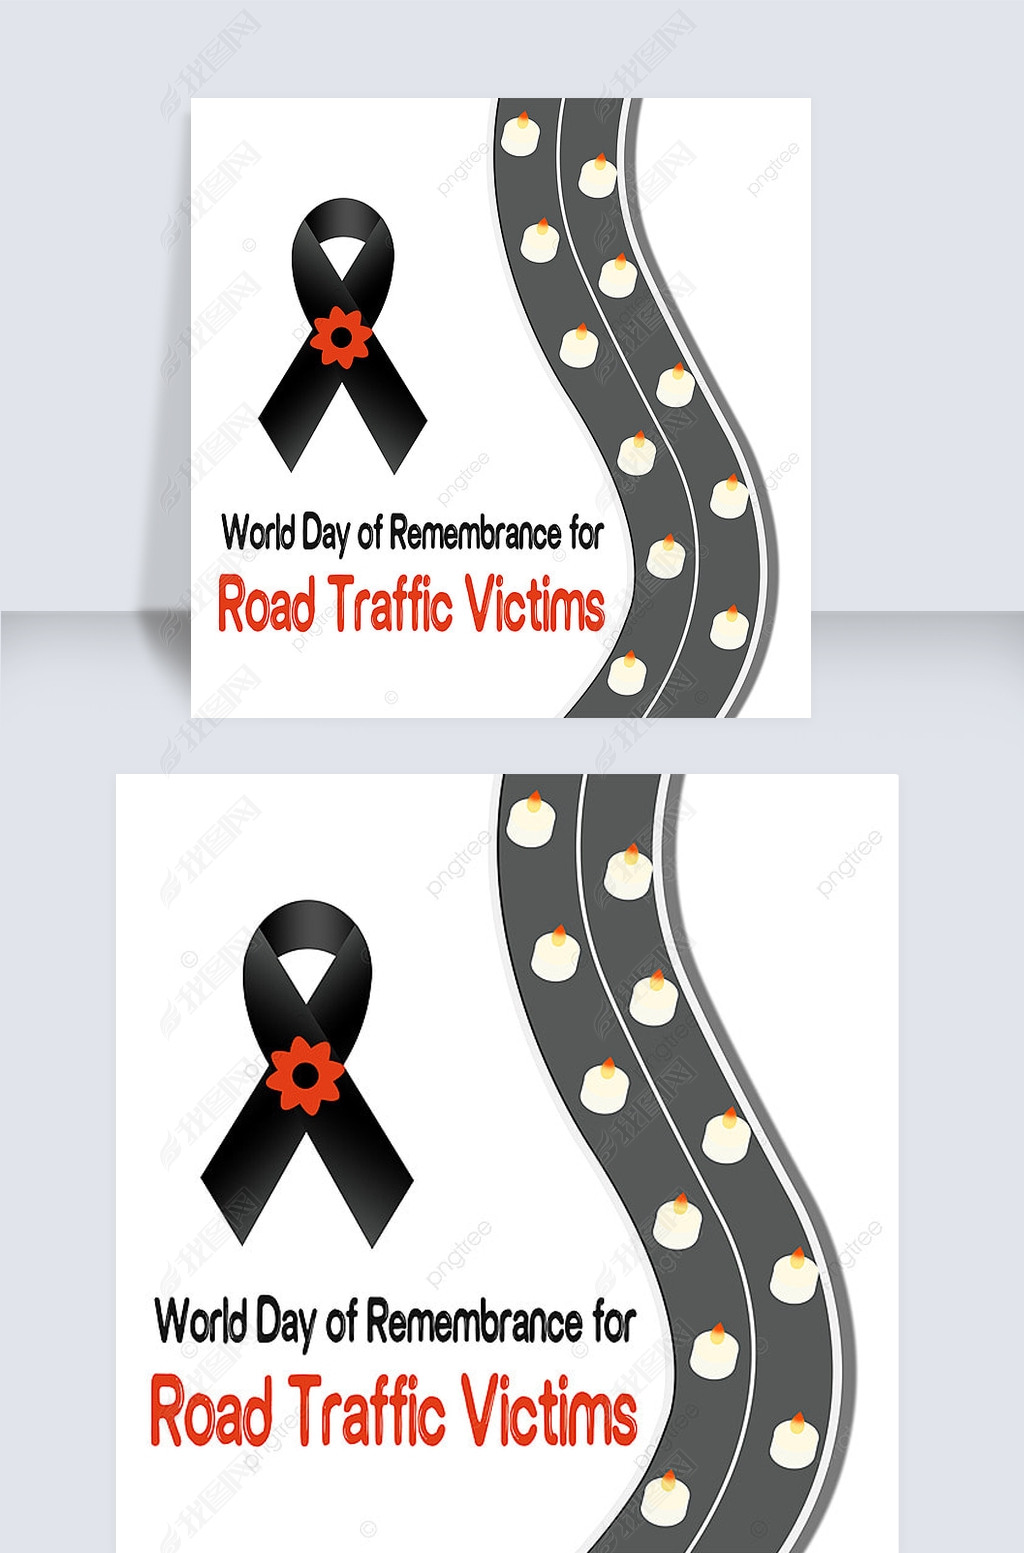 world day of remembrance for road traffic victims cartoon white social media post